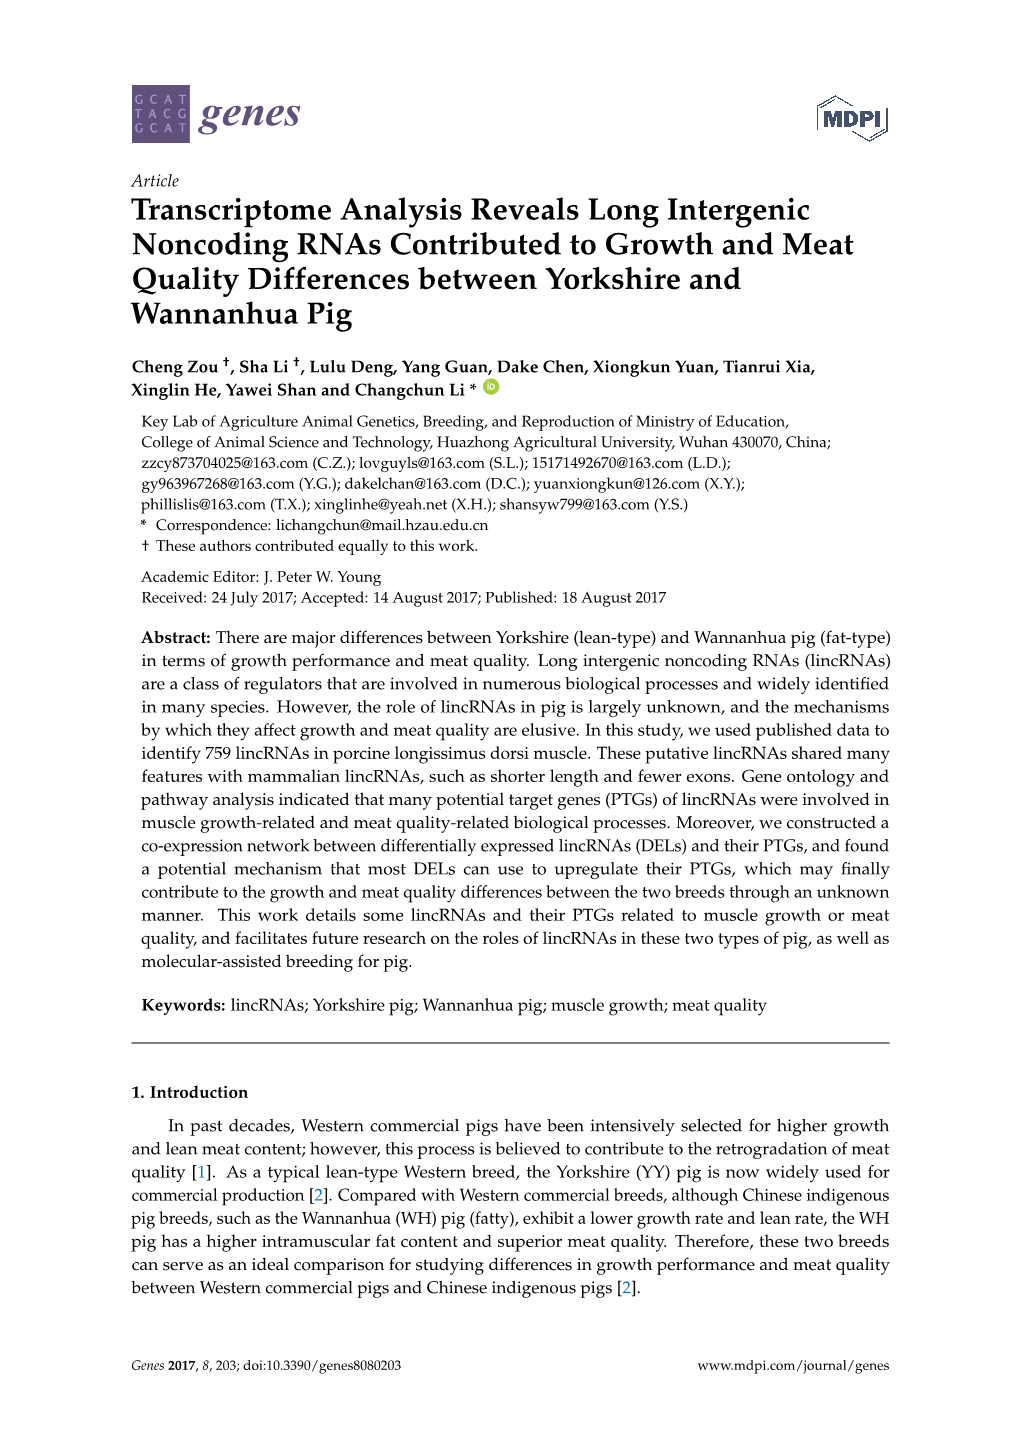 Transcriptome Analysis Reveals Long Intergenic Noncoding Rnas Contributed to Growth and Meat Quality Differences Between Yorkshire and Wannanhua Pig